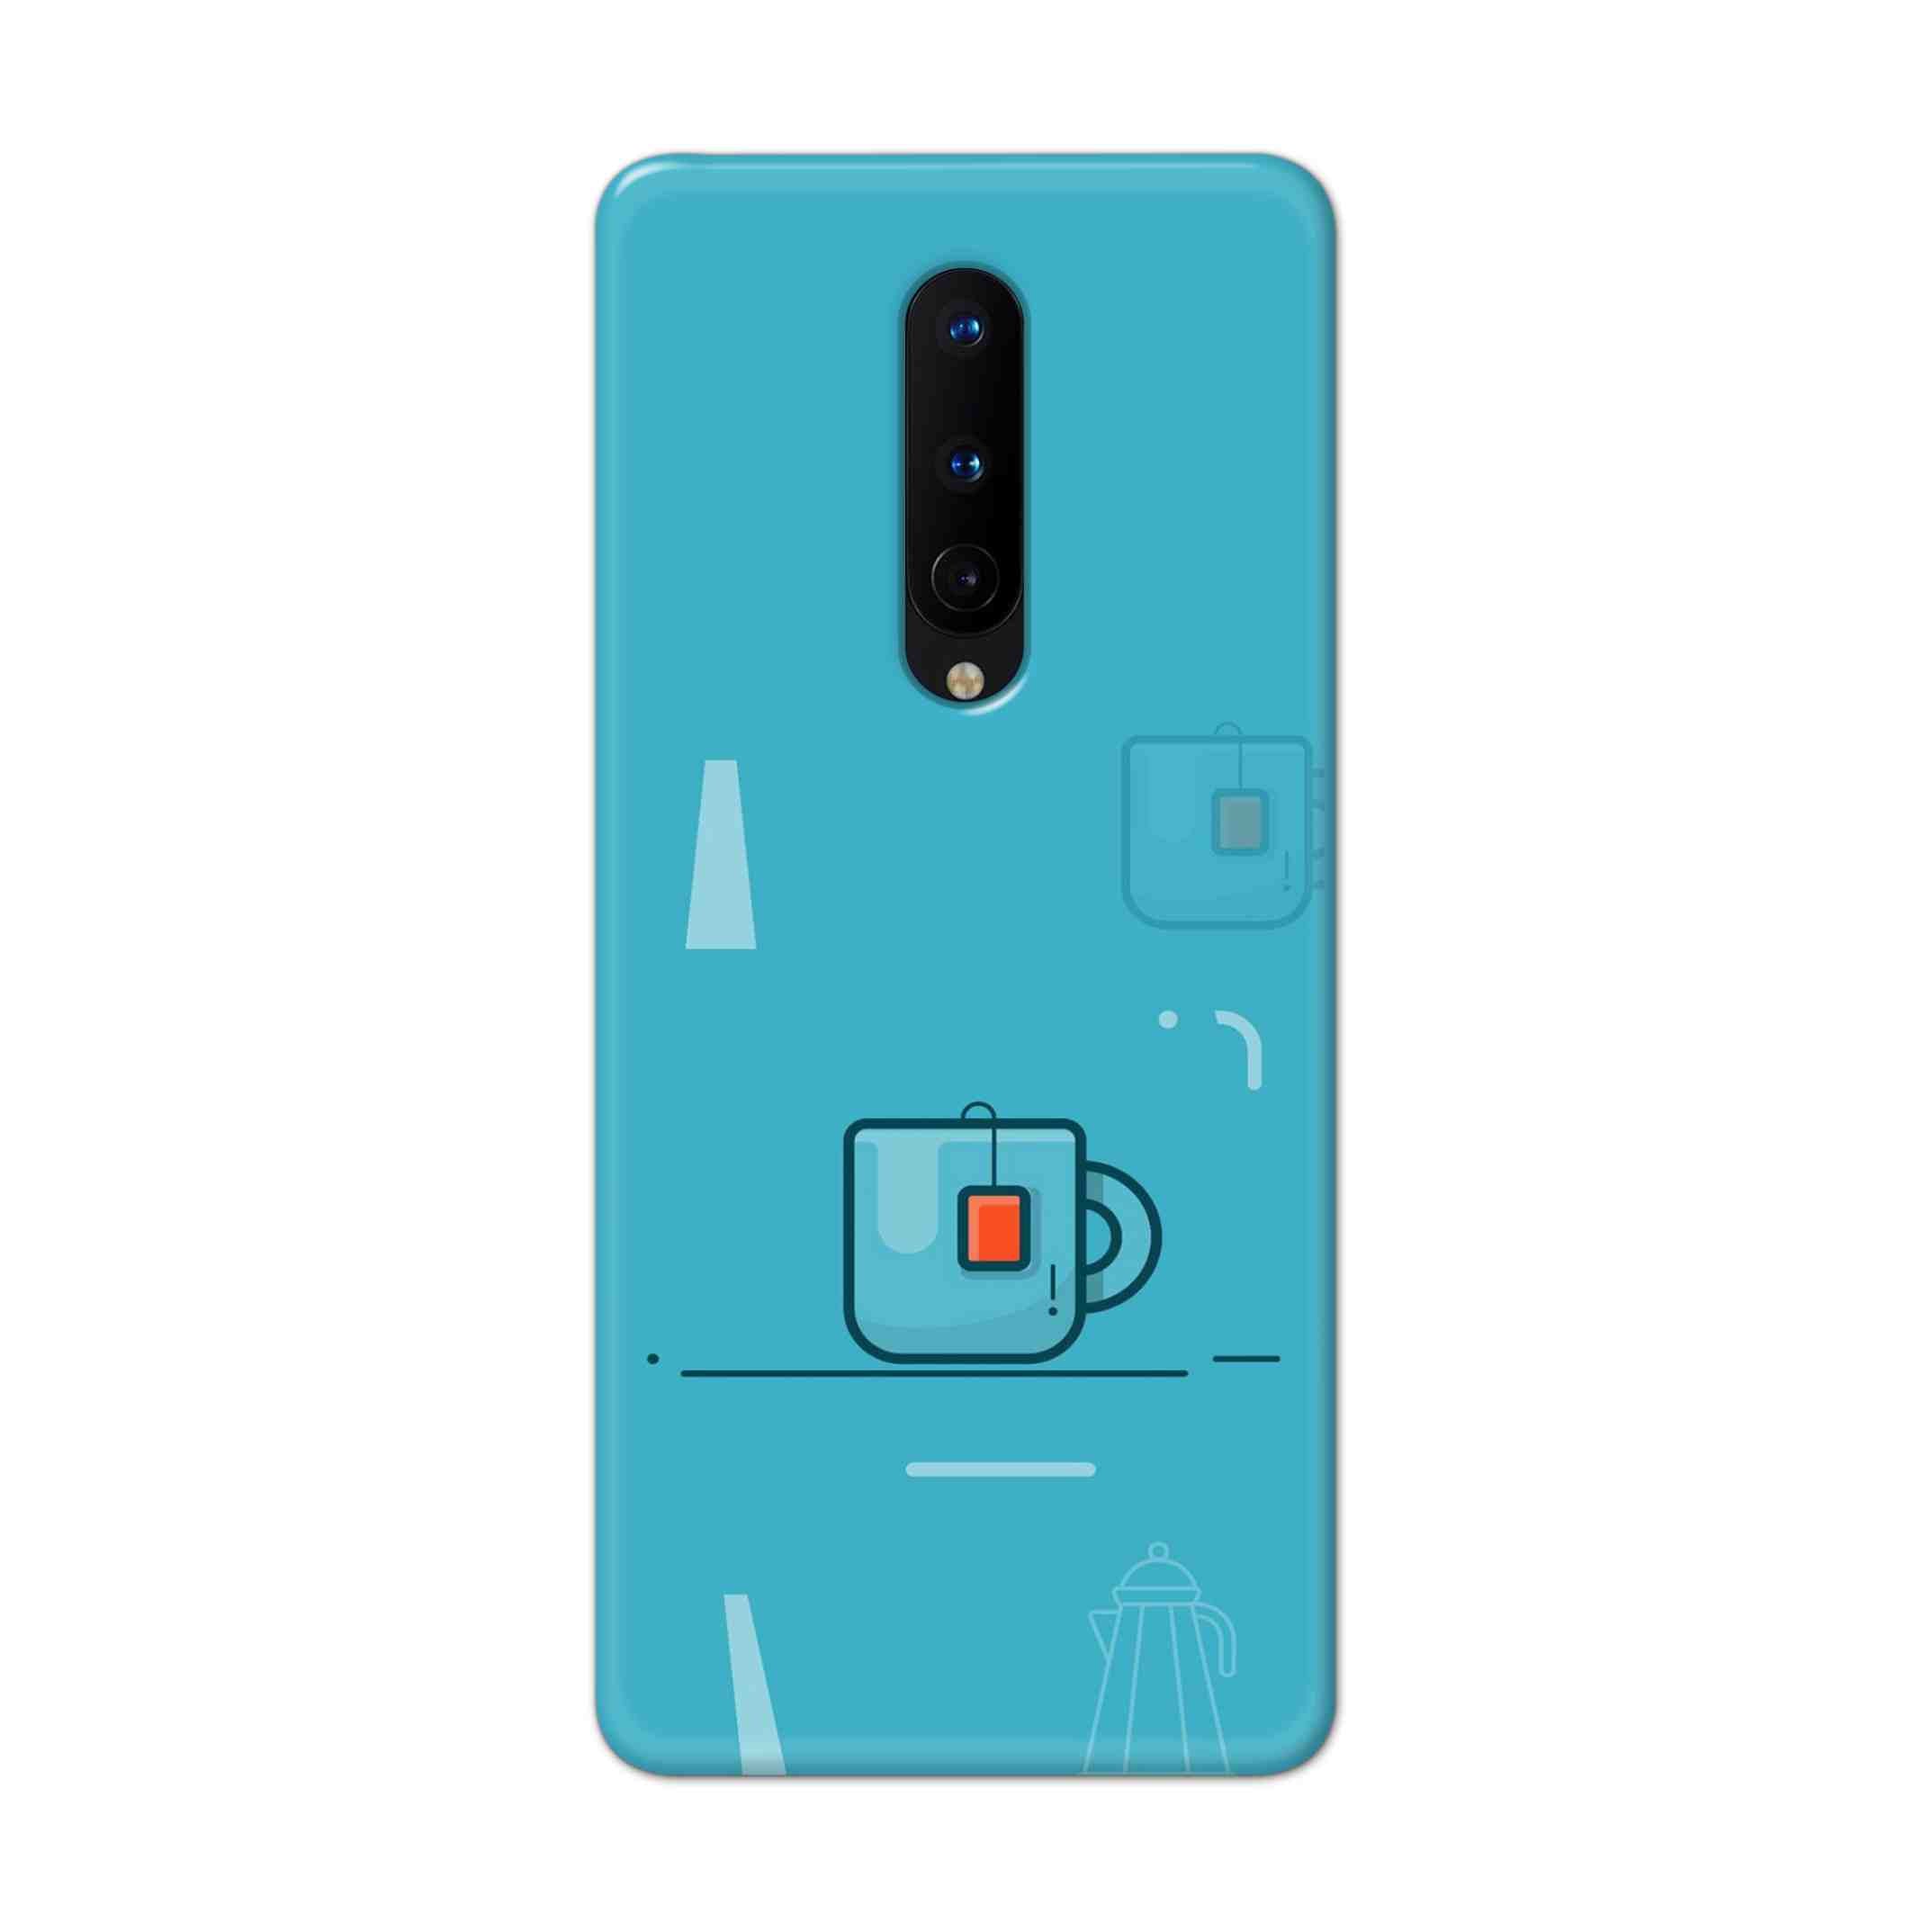 Buy Green Tea Hard Back Mobile Phone Case Cover For OnePlus 8 Online